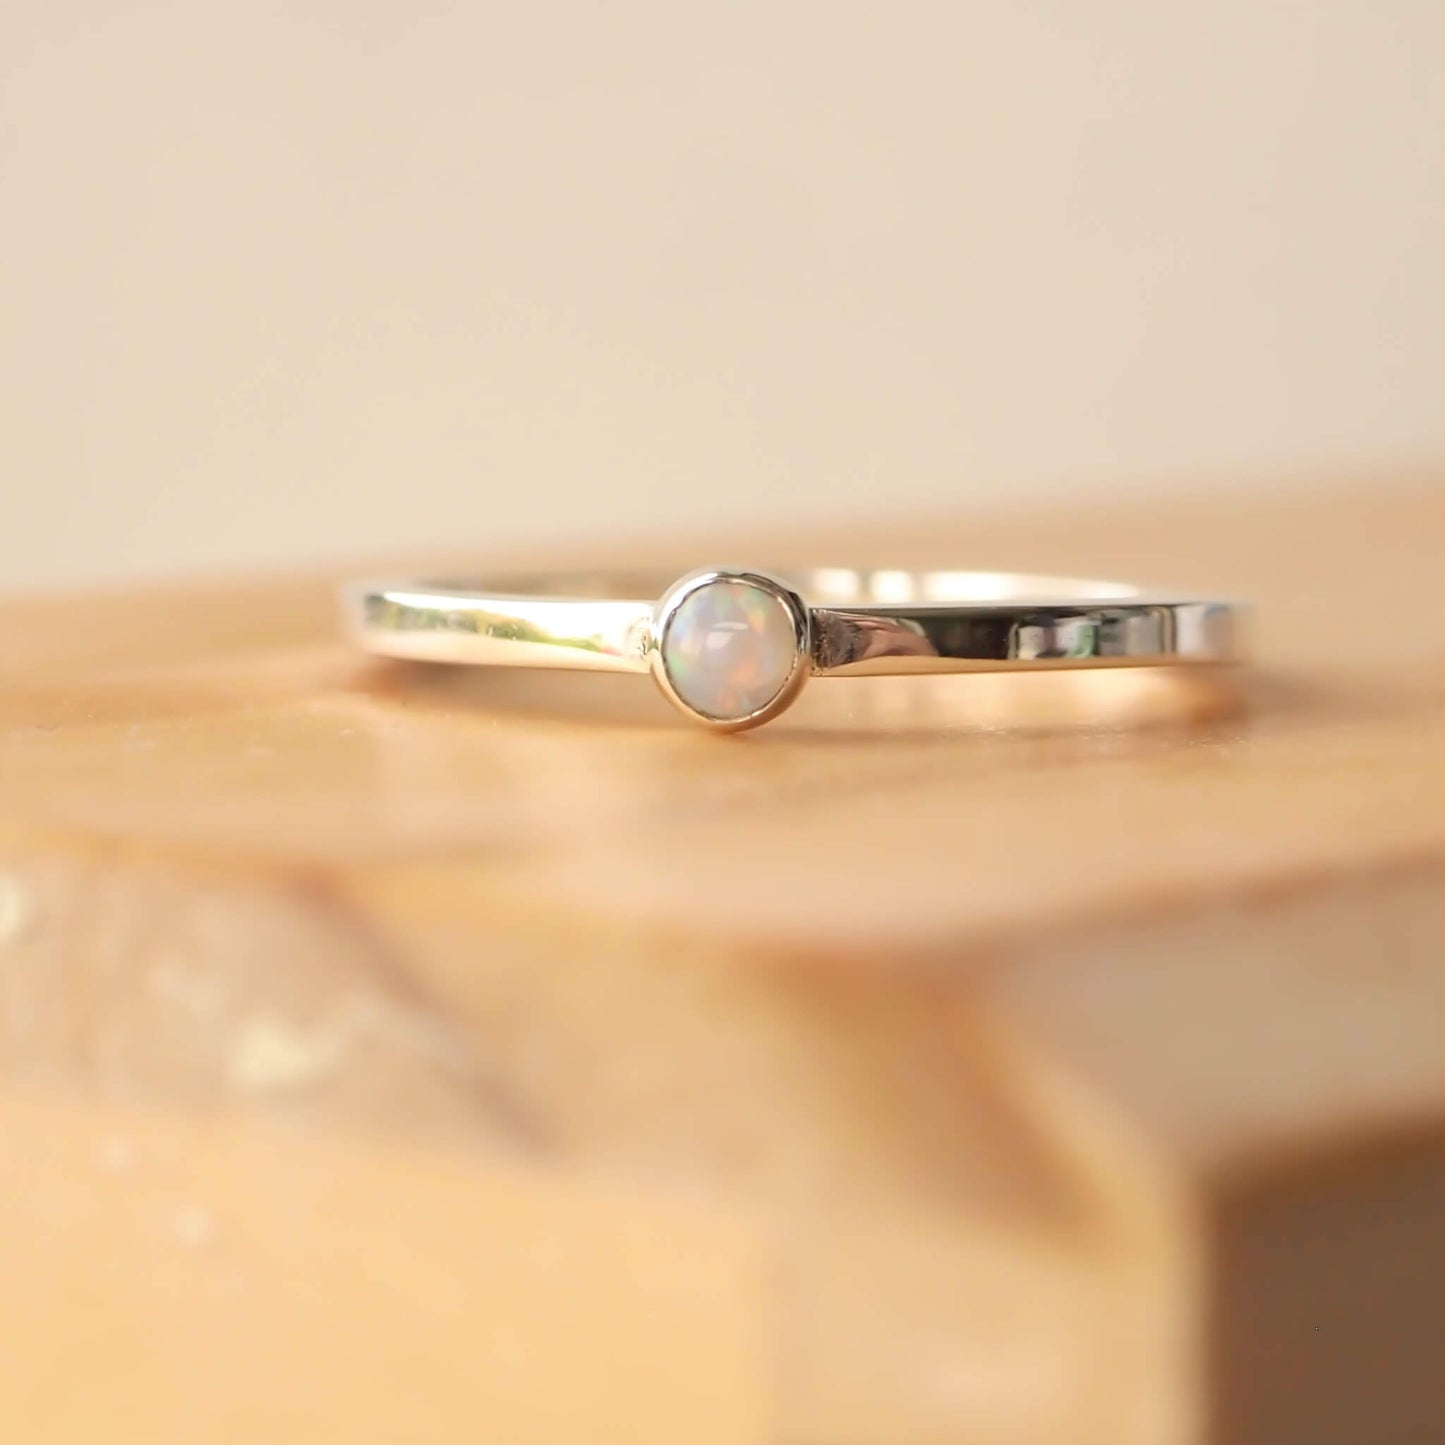 Sterling Silver and genuine Opal Silver ring on a square profile band. Handmade in Scotland by maram jewellery